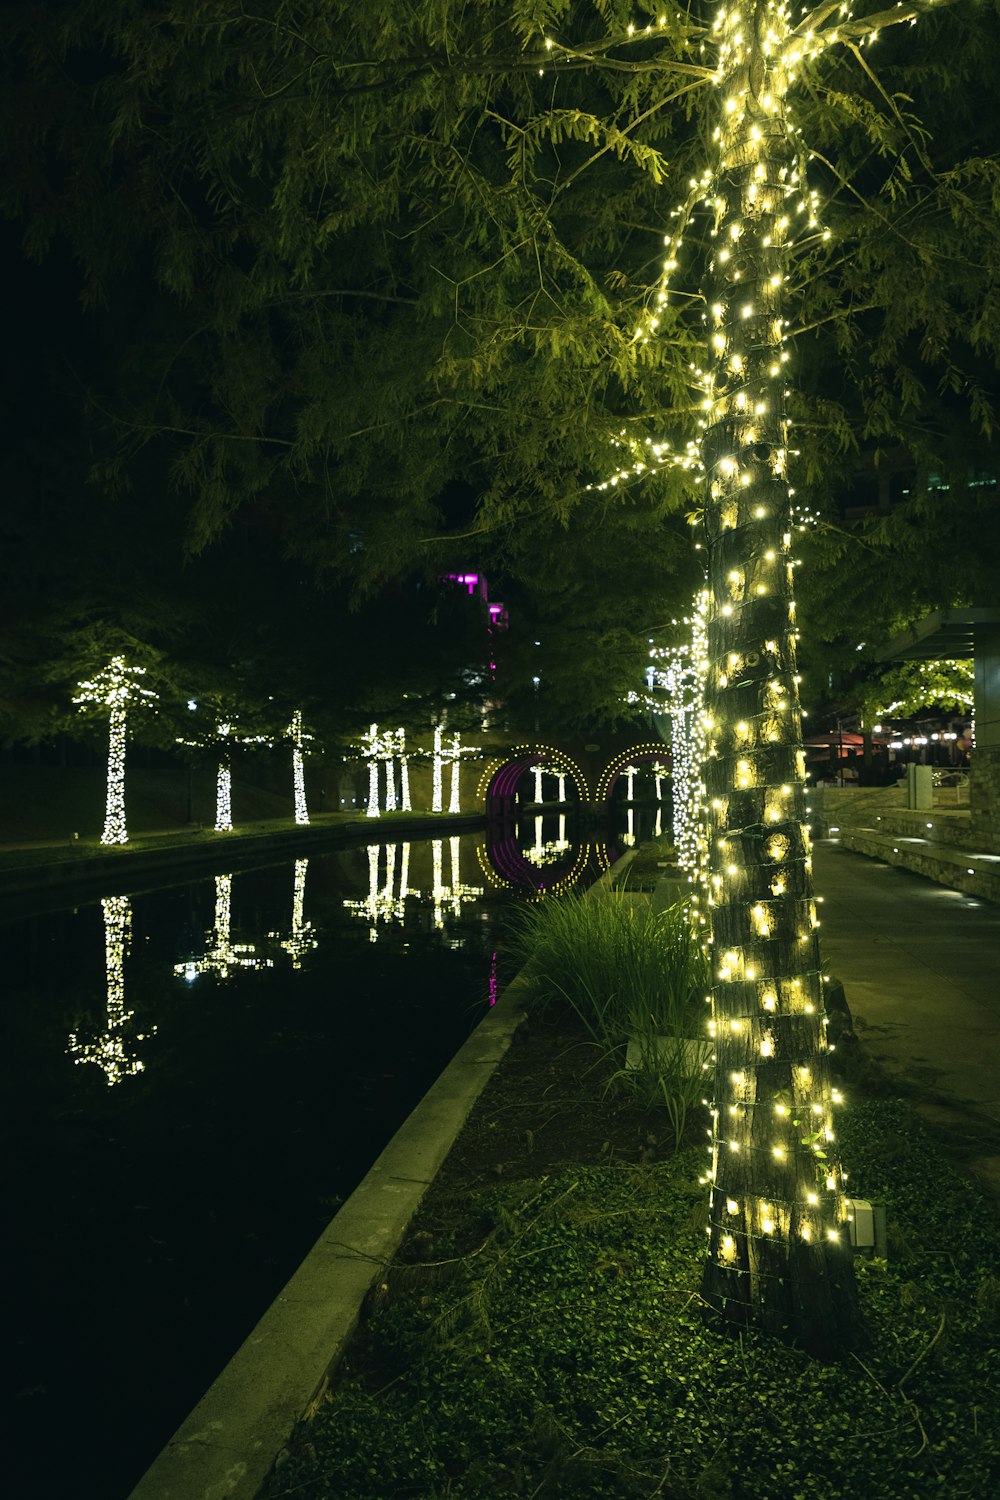 a lighted tree next to a body of water